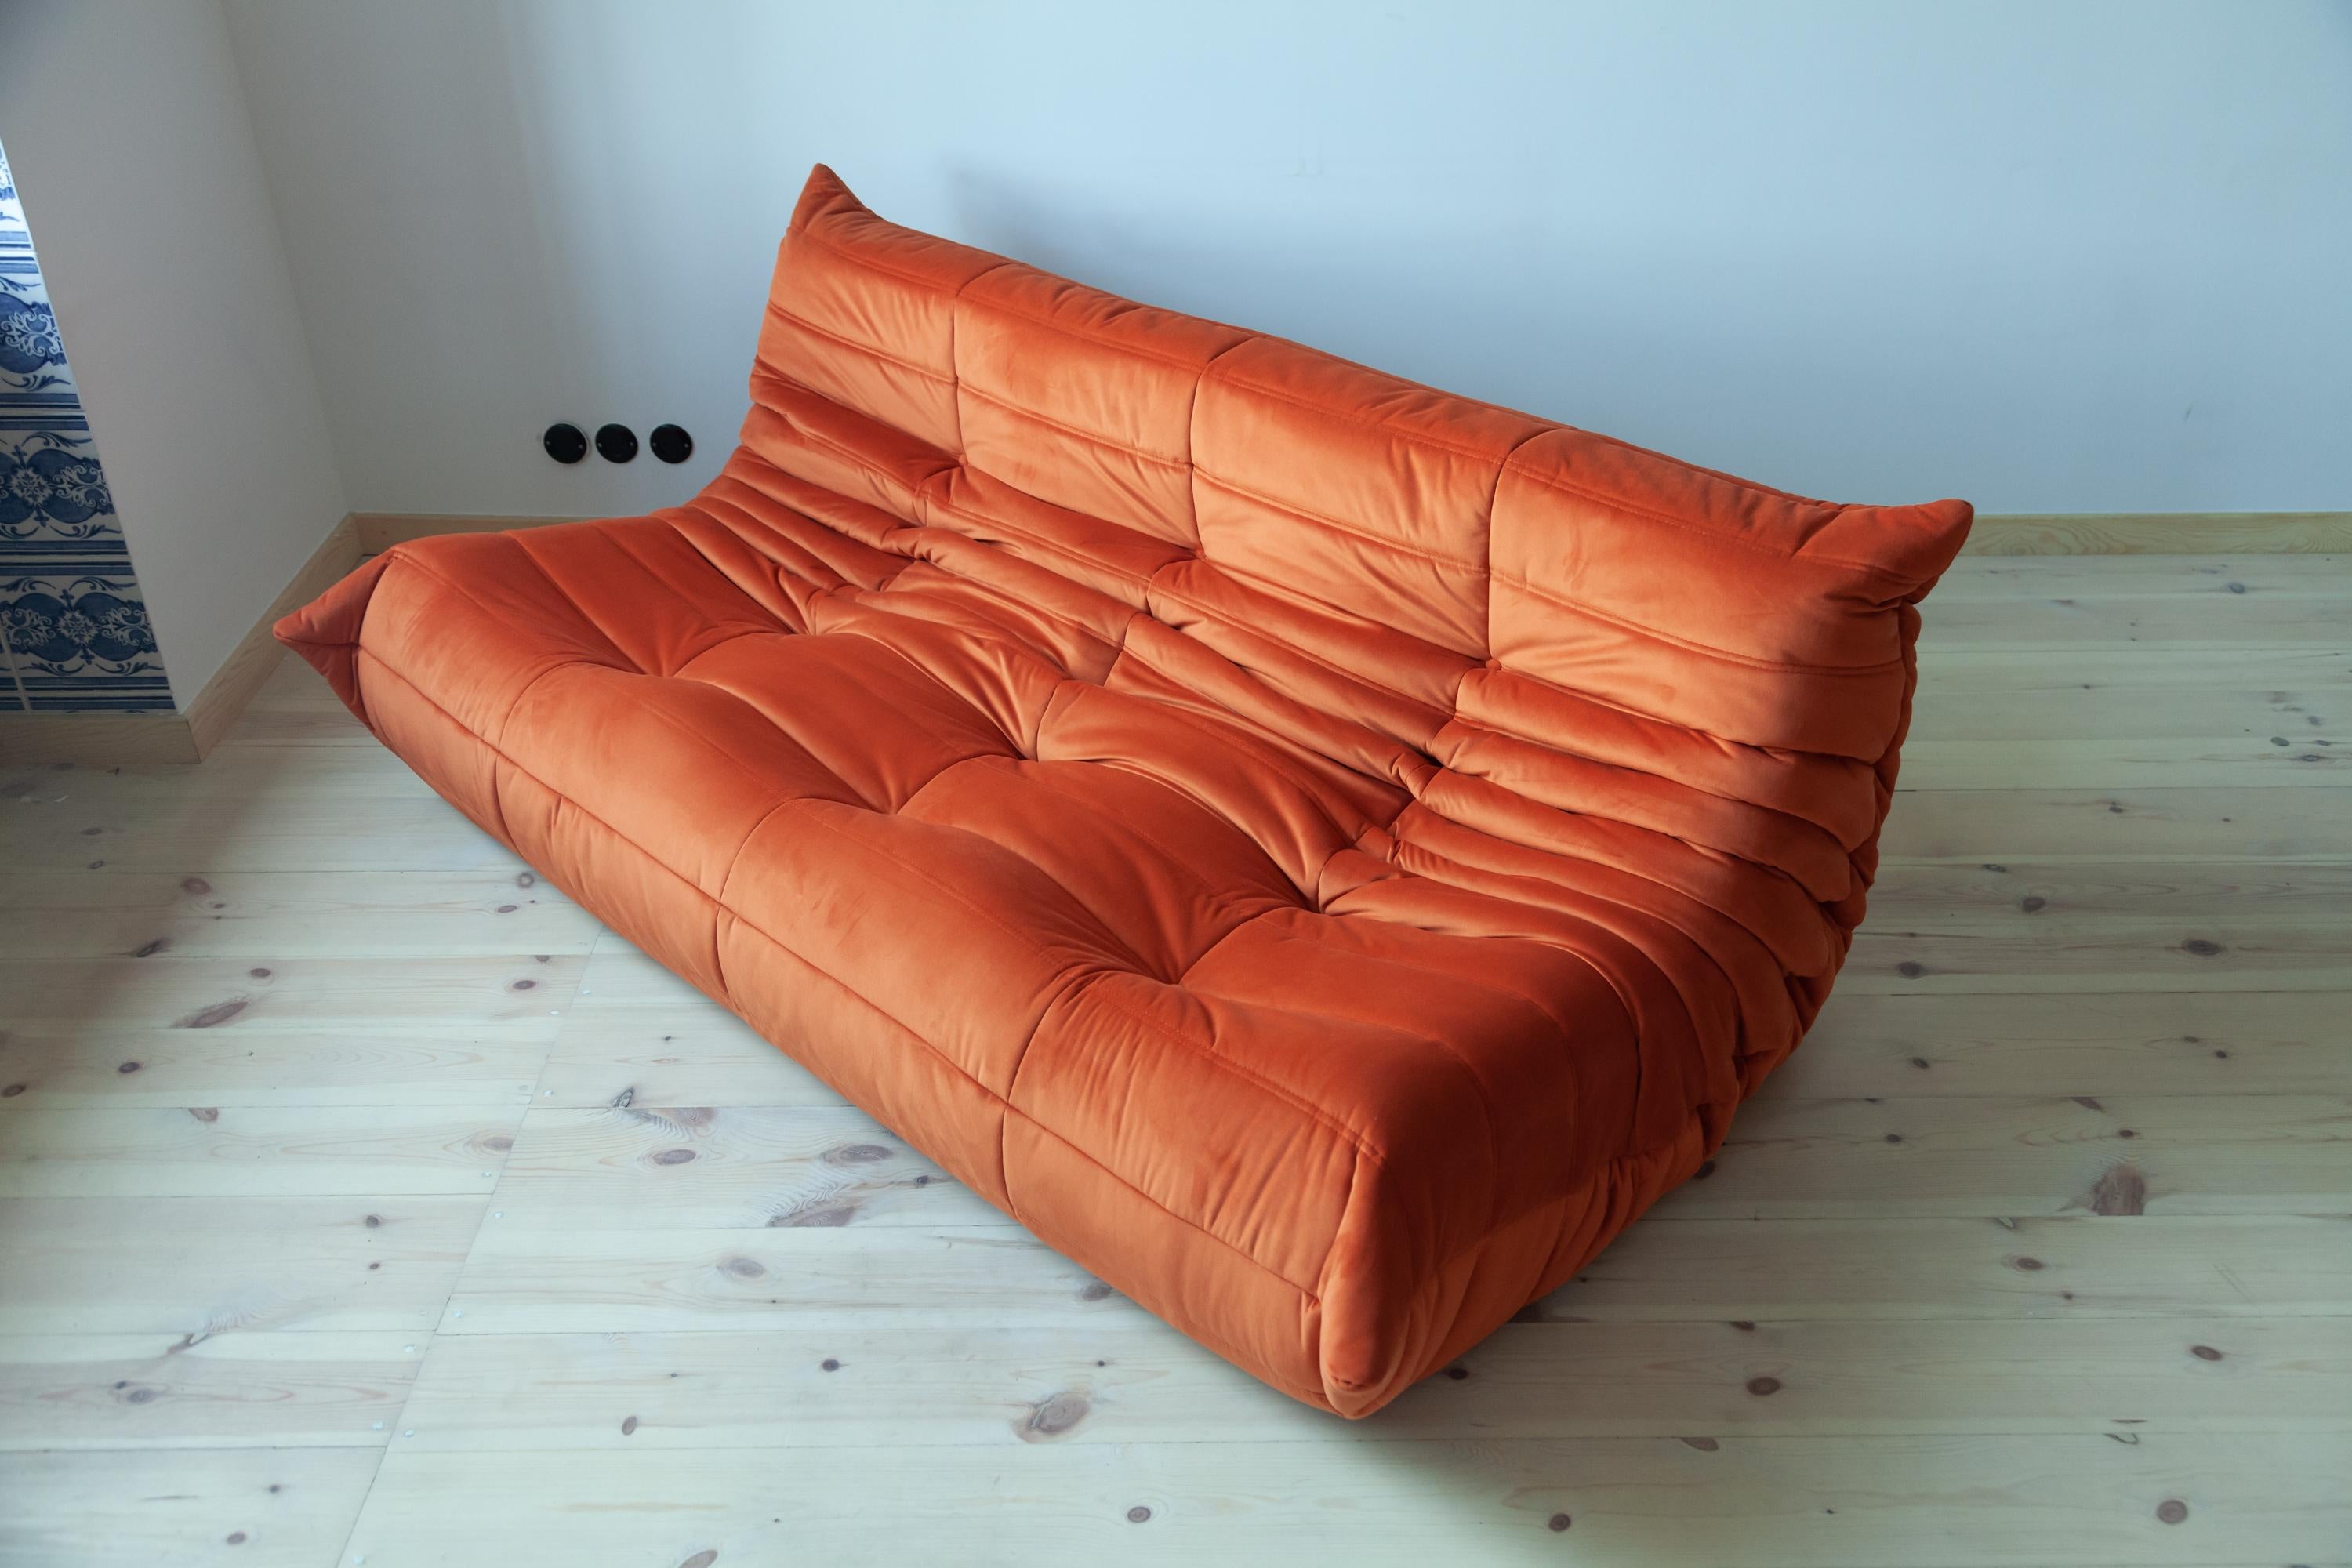 This Togo three-seat sofa was designed by Michel Ducaroy in 1973 and was manufactured by Ligne Roset in France. It has been reupholstered in new orange velvet (70 x 174 x 102 cm). It has the original Ligne Roset logo and genuine Ligne Roset bottom.